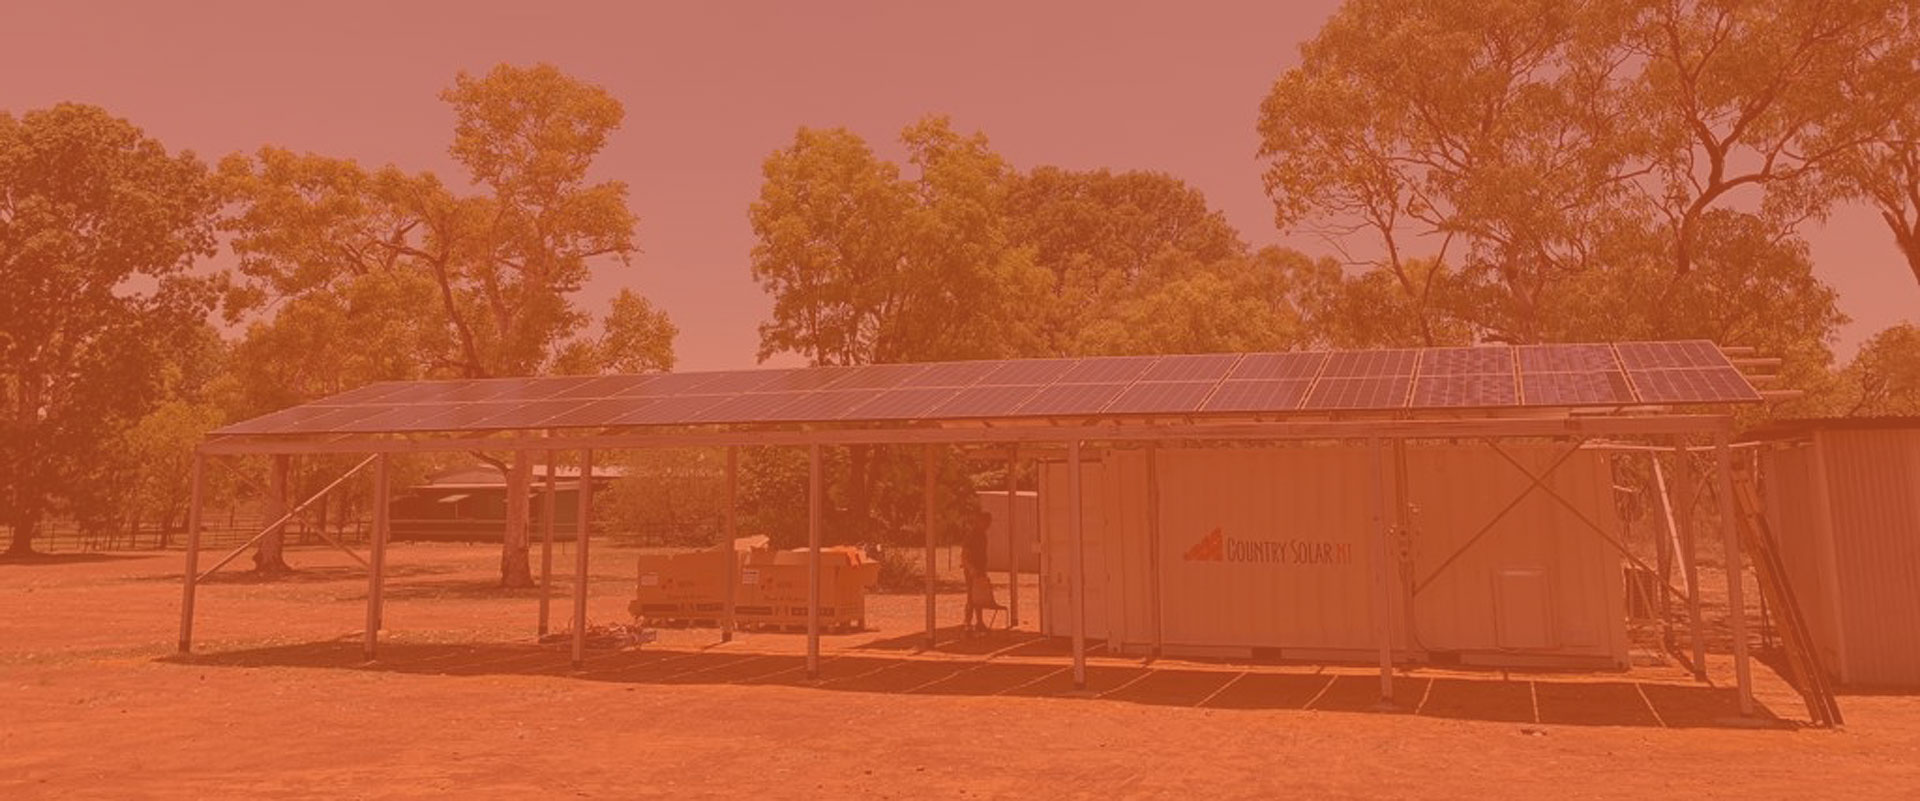 off grid solar power in NT outback australia